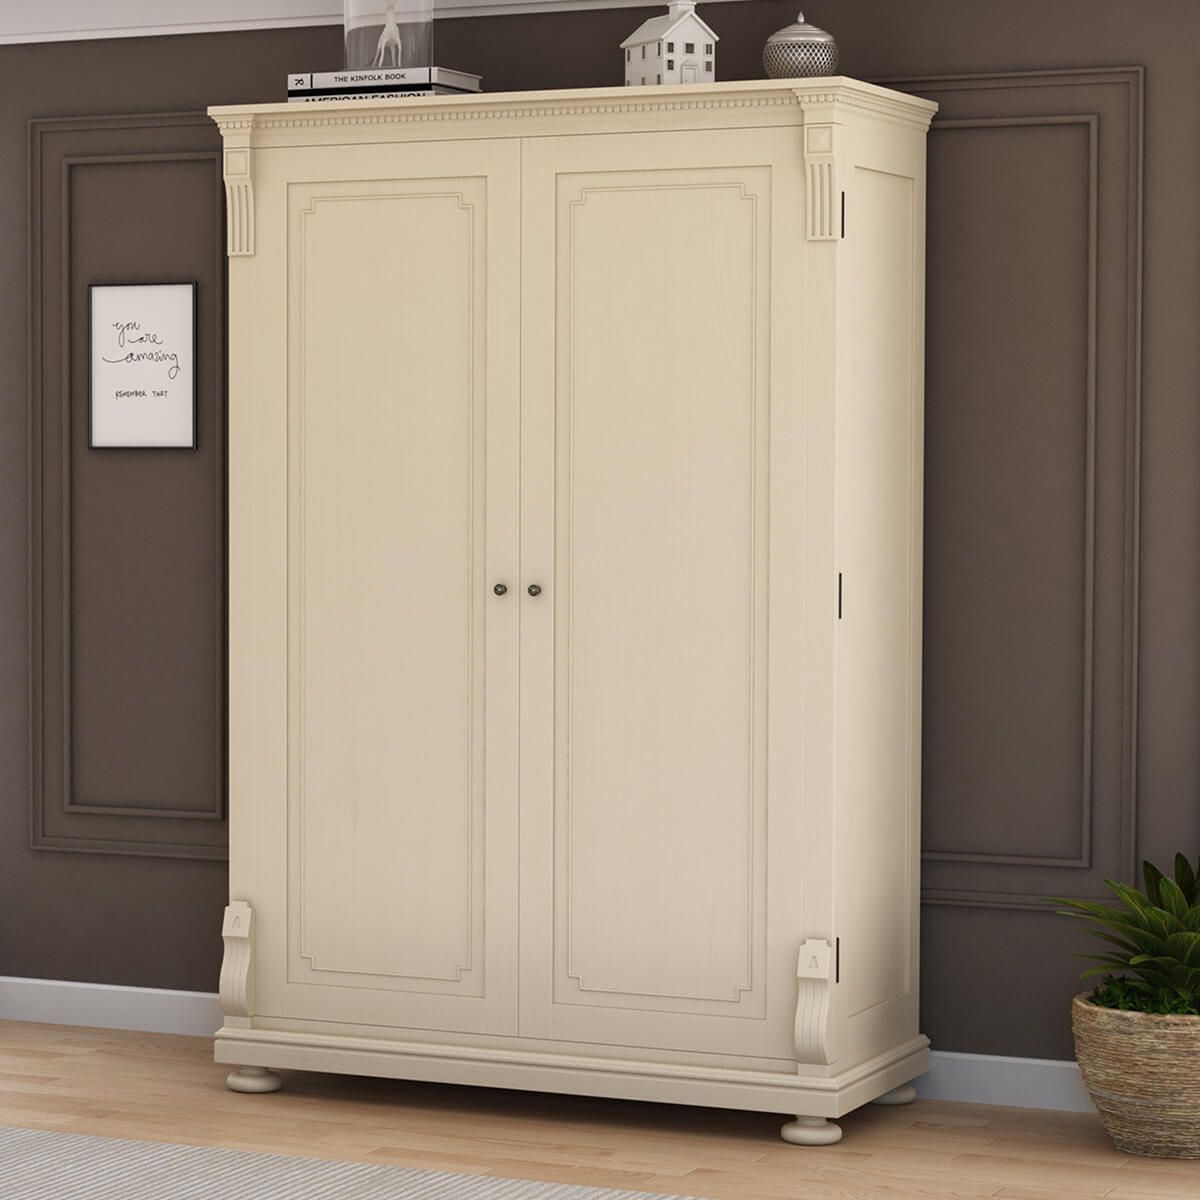 Otranto Mahogany Wood Large White Armoire Wardrobe Intended For White Wardrobes Armoire (View 13 of 15)